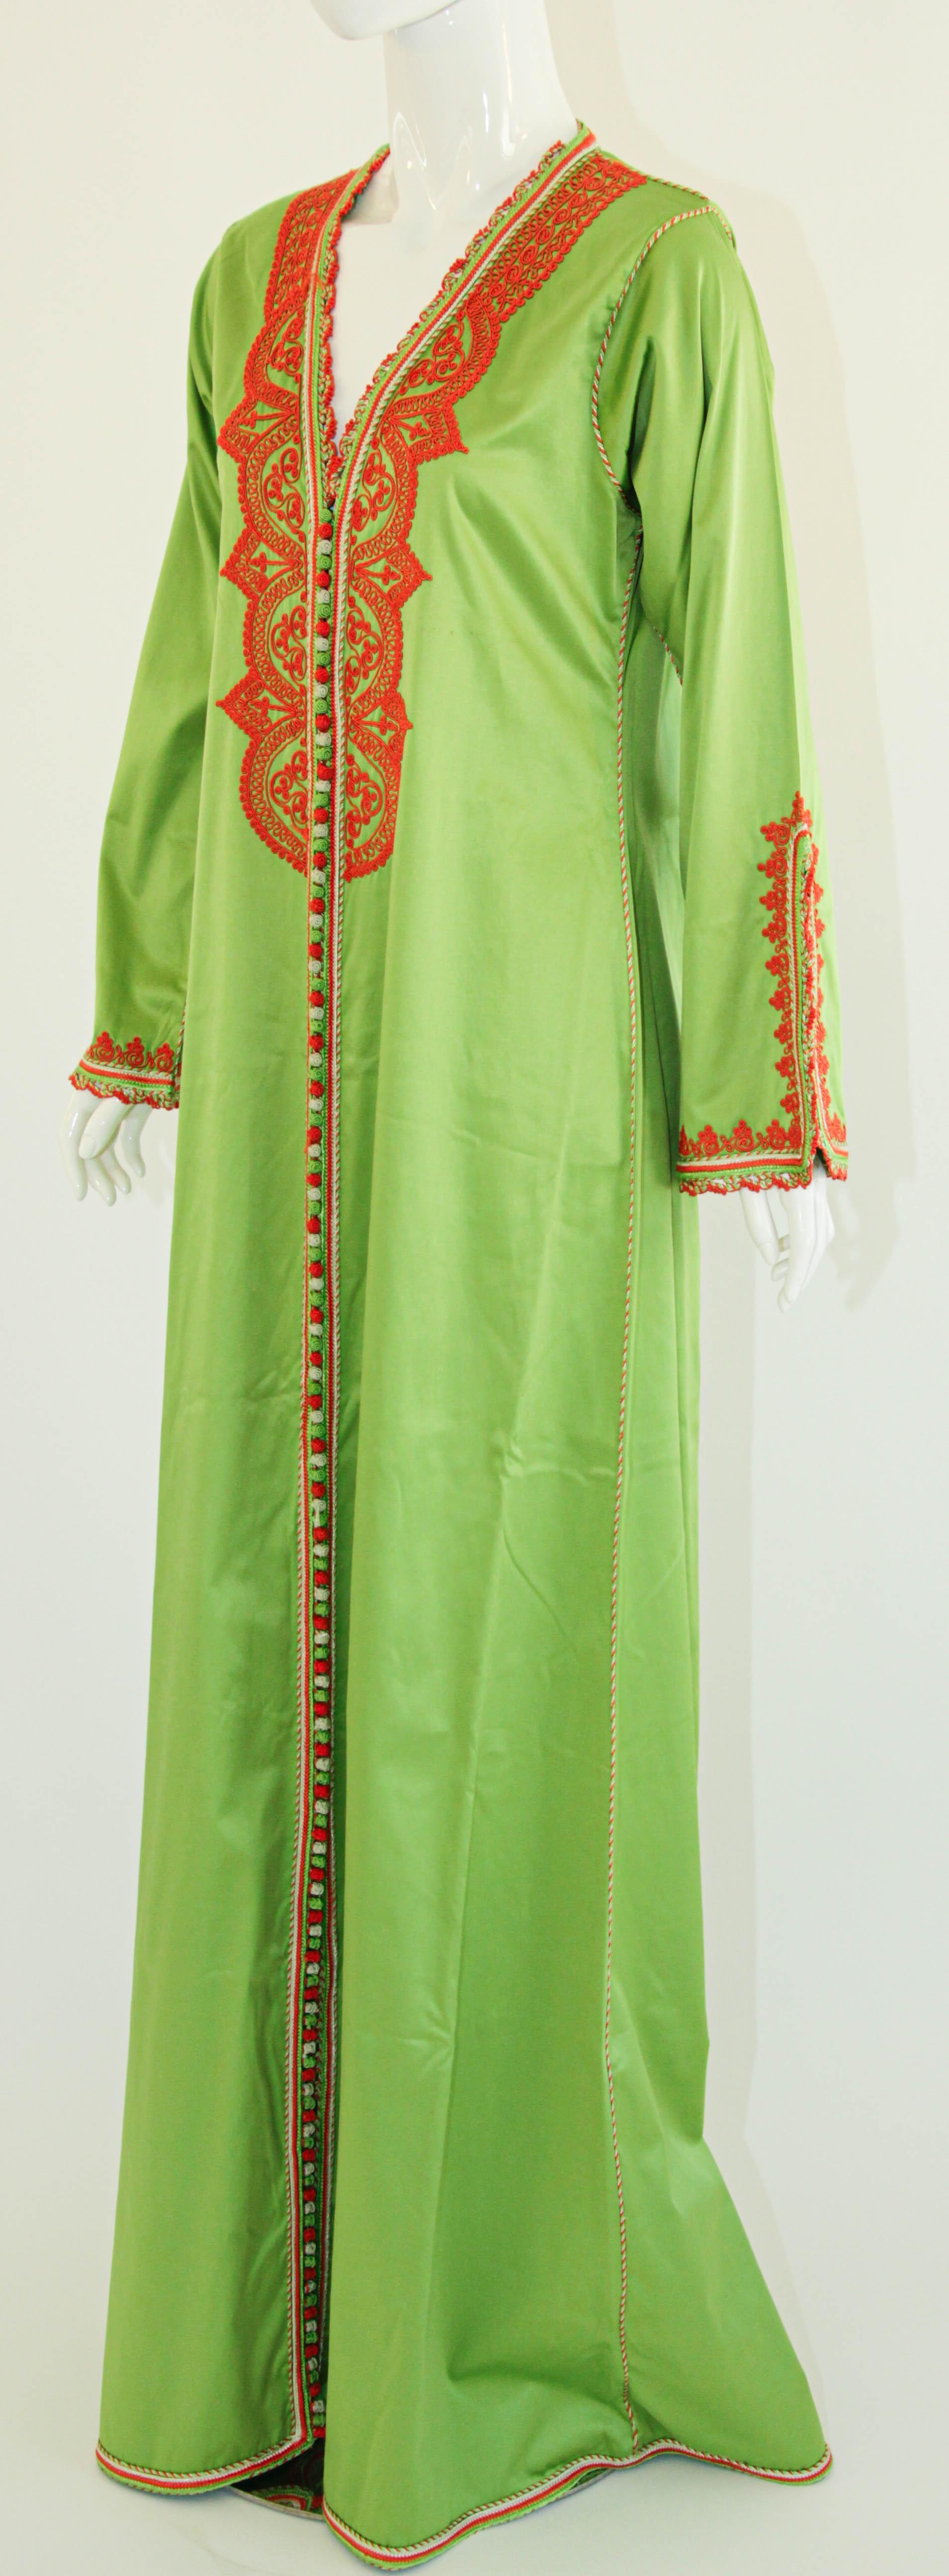 Vintage Moroccan Green Kaftan with Orange Embroideries For Sale 6